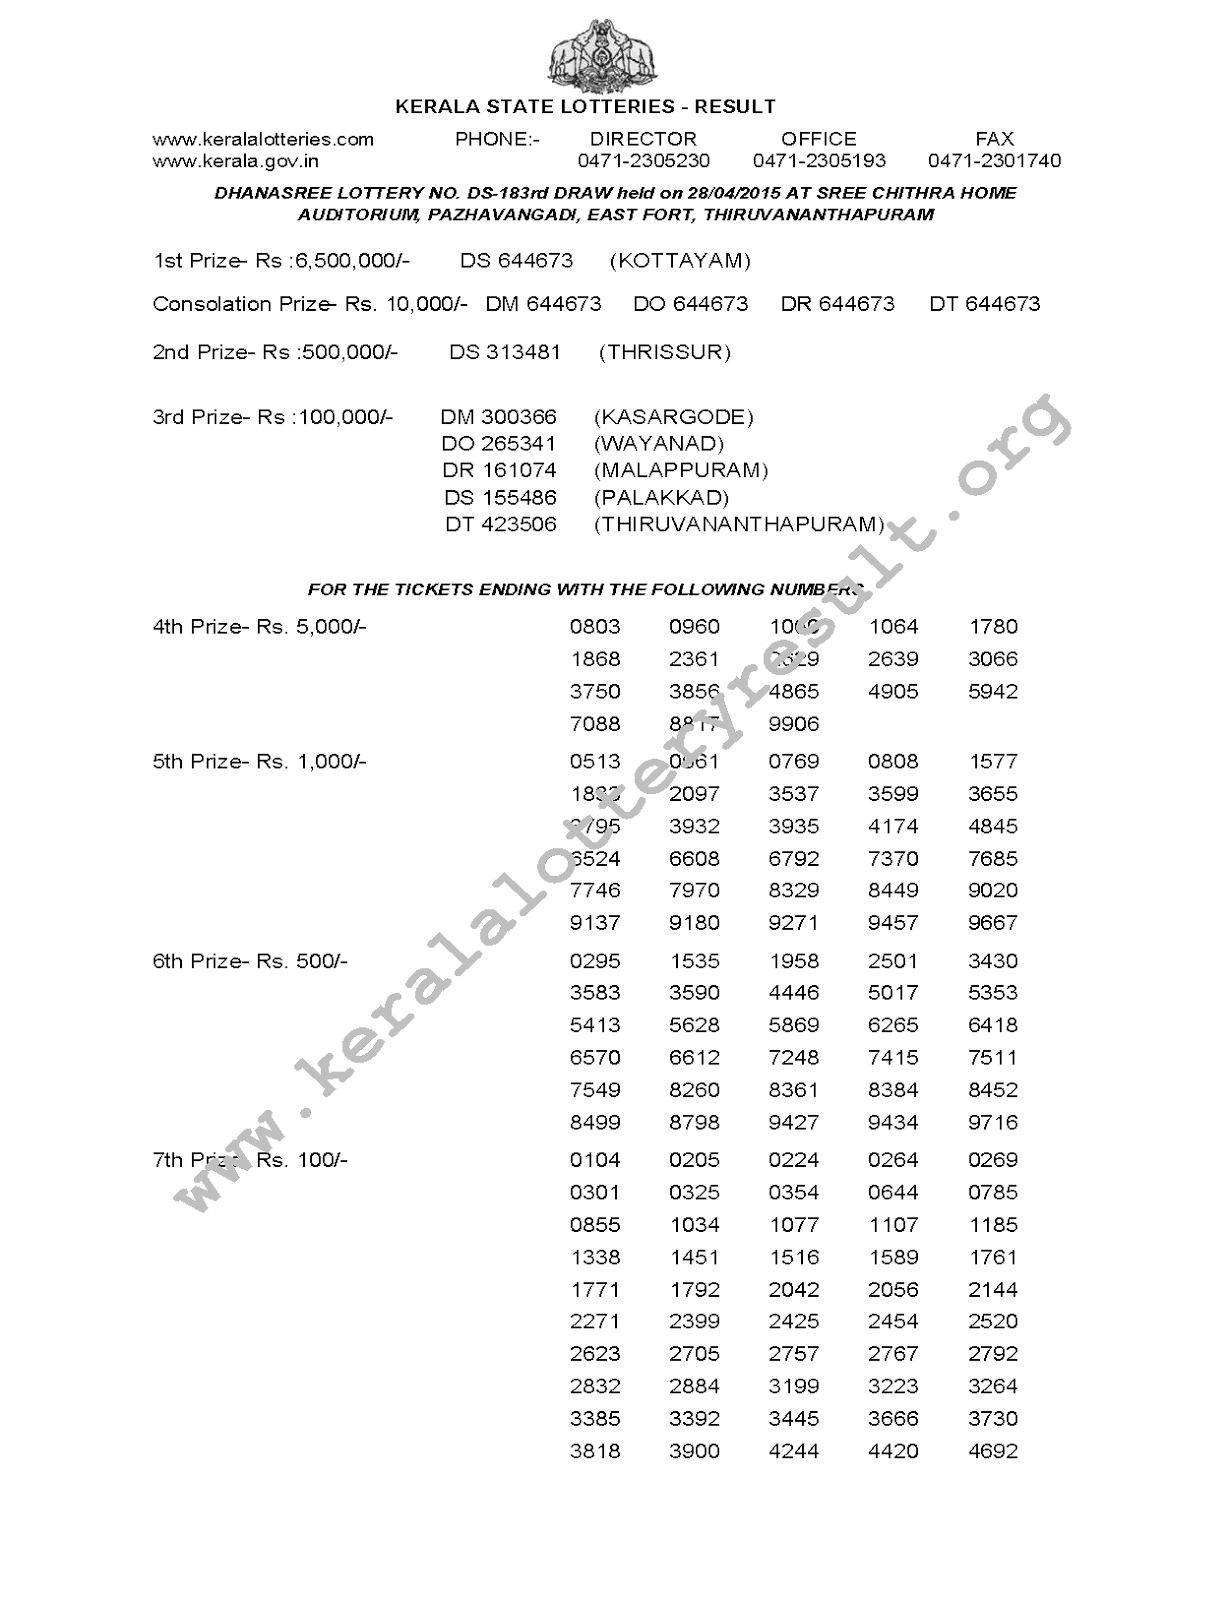 DHANASREE Lottery DS 183 Result 28-4-2015